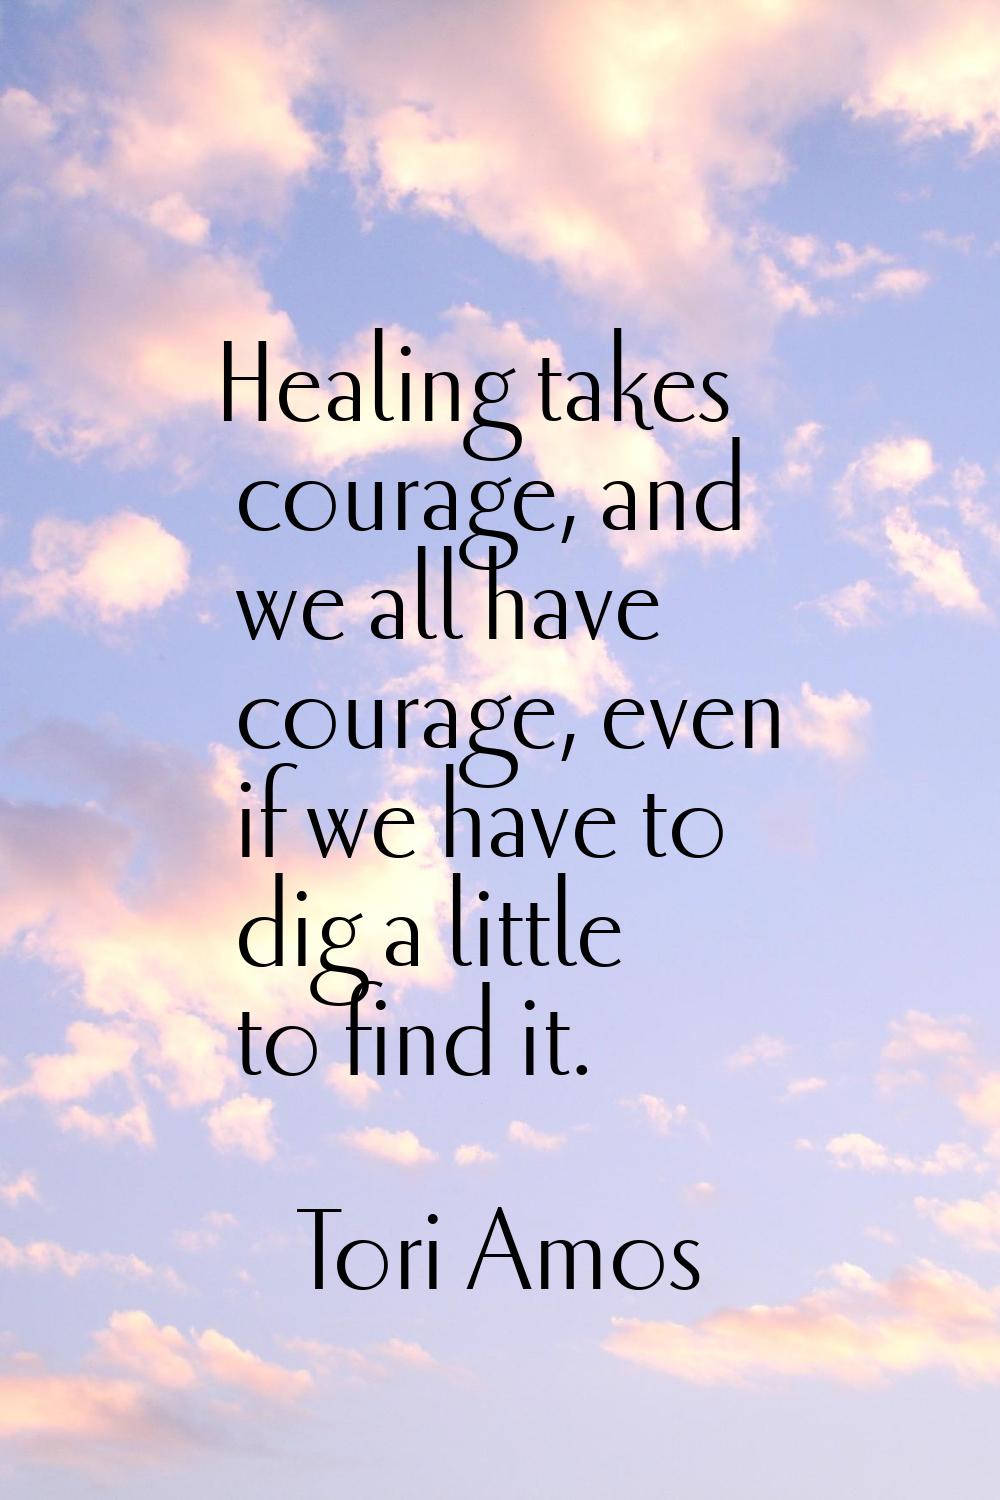 Healing takes courage, and we all have courage, even if we have to dig a little to find it.